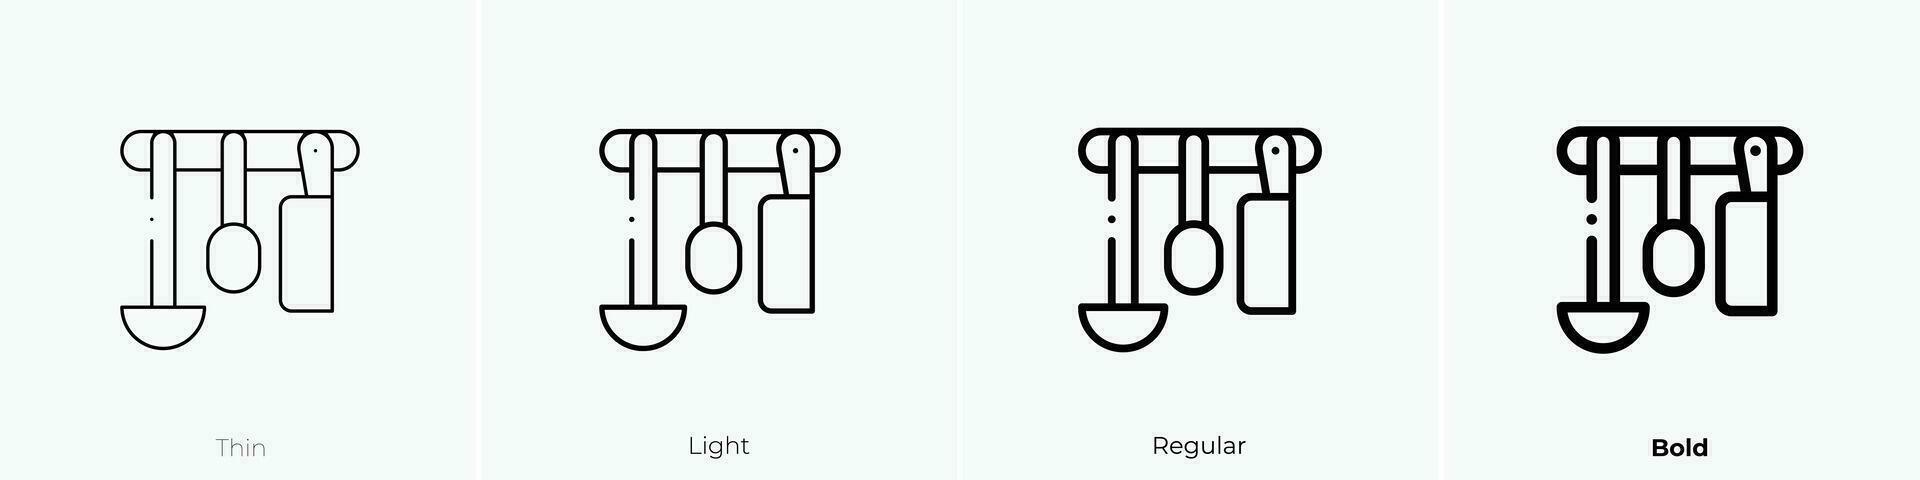 rack icon. Thin, Light, Regular And Bold style design isolated on white background vector